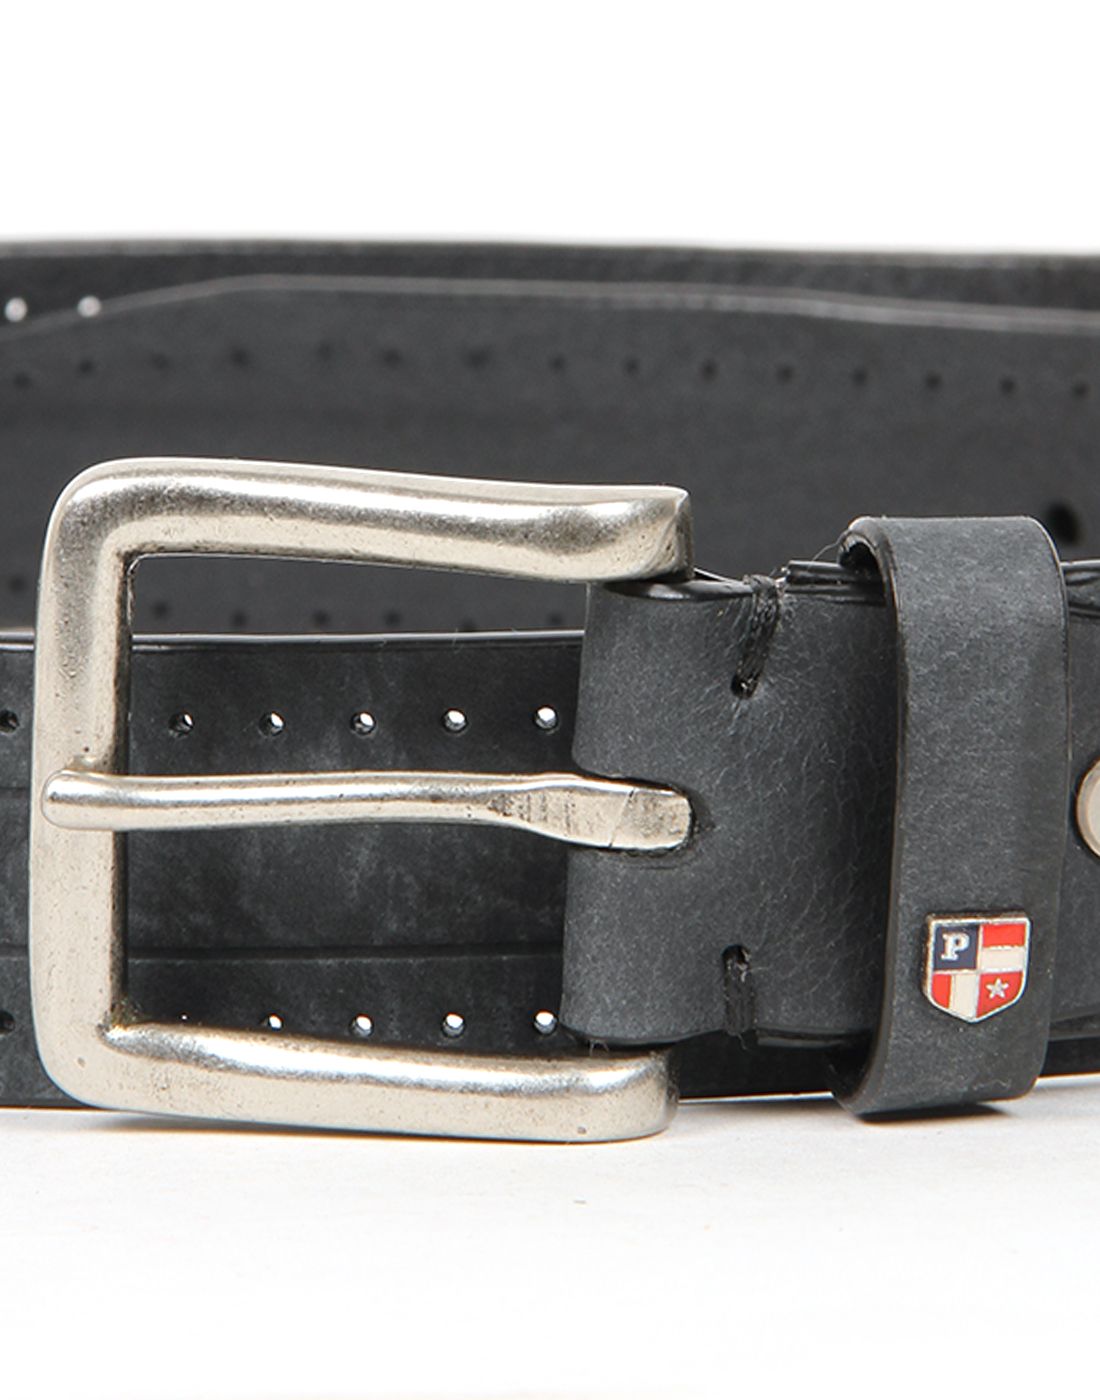 U.S. Polo Assn. Black Leather Casual Belts: Buy Online at Low Price in